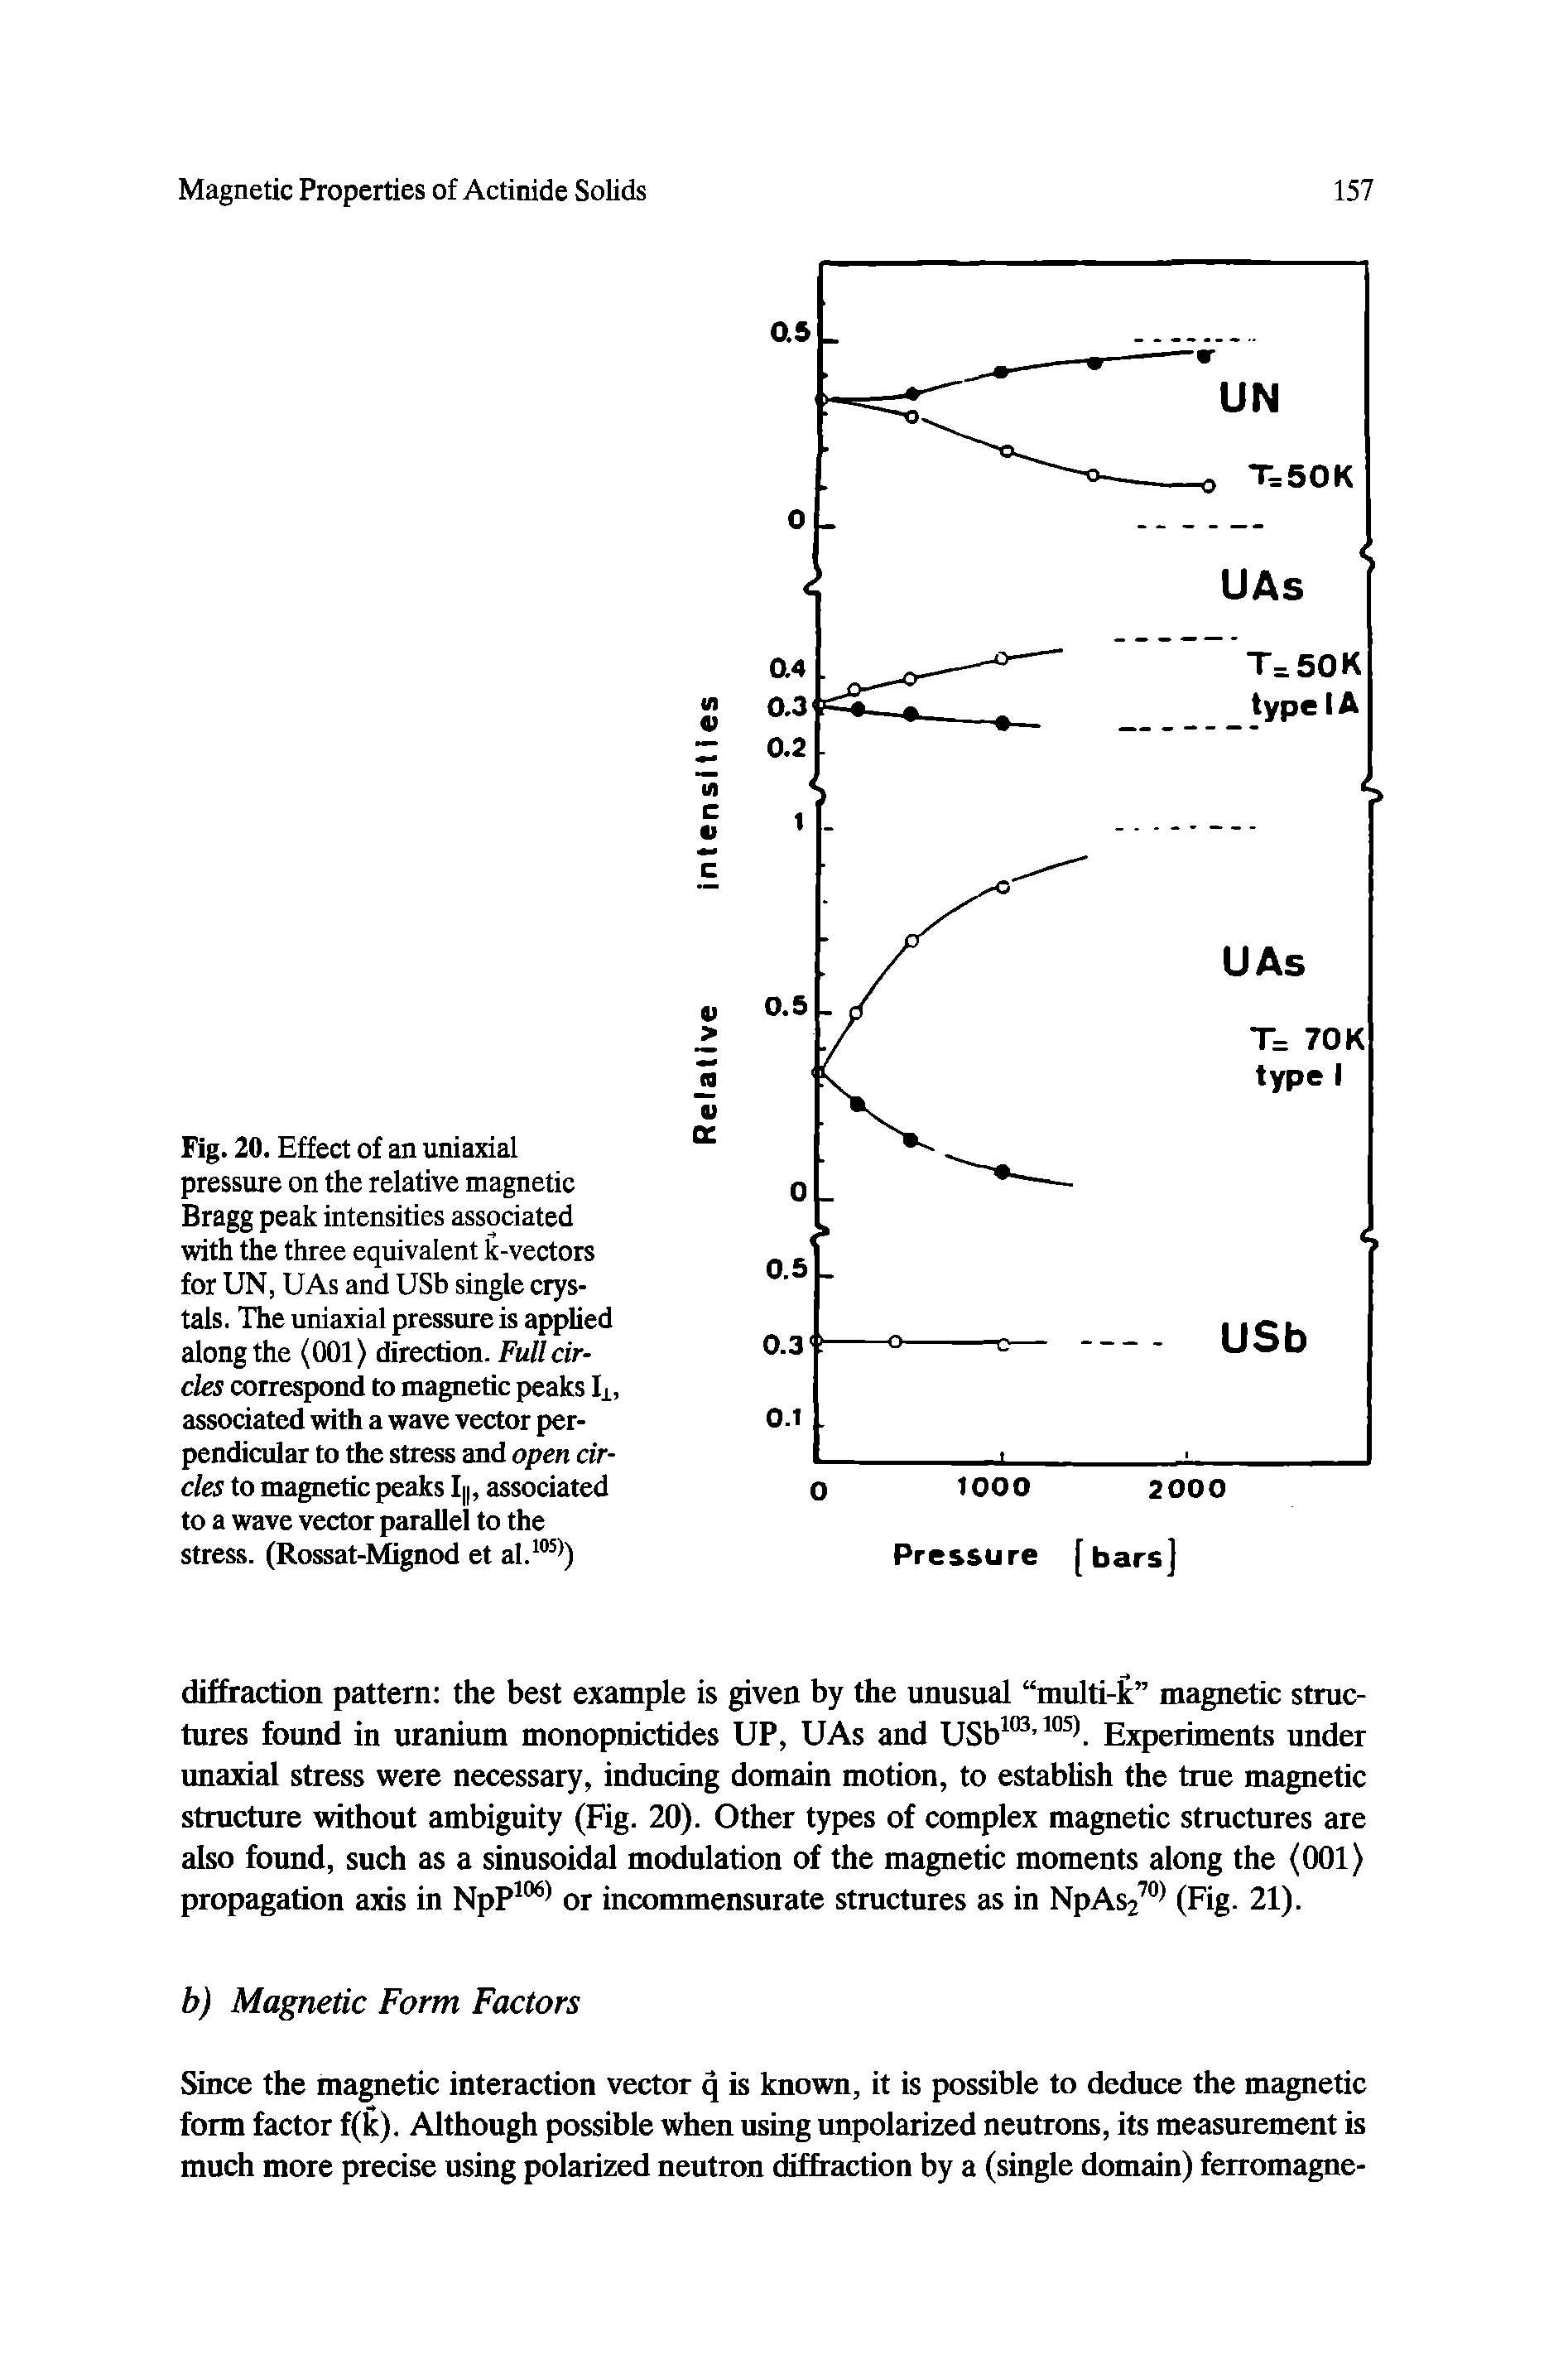 Fig. 20. Effect of an uniaxial pressure on the relative magnetic Bragg peak intensities associated with the three equivalent k-vectors for UN, UAs and USb single crystals. The uniaxial pressure is applied along the (001) direction. Full circles correspond to magnetic peaks Ii, associated with a wave vector perpendicular to the stress and open circles to magnetic peaks I, associated to a wave vector parallel to the stress. (Rossat-Mignod et al. )...